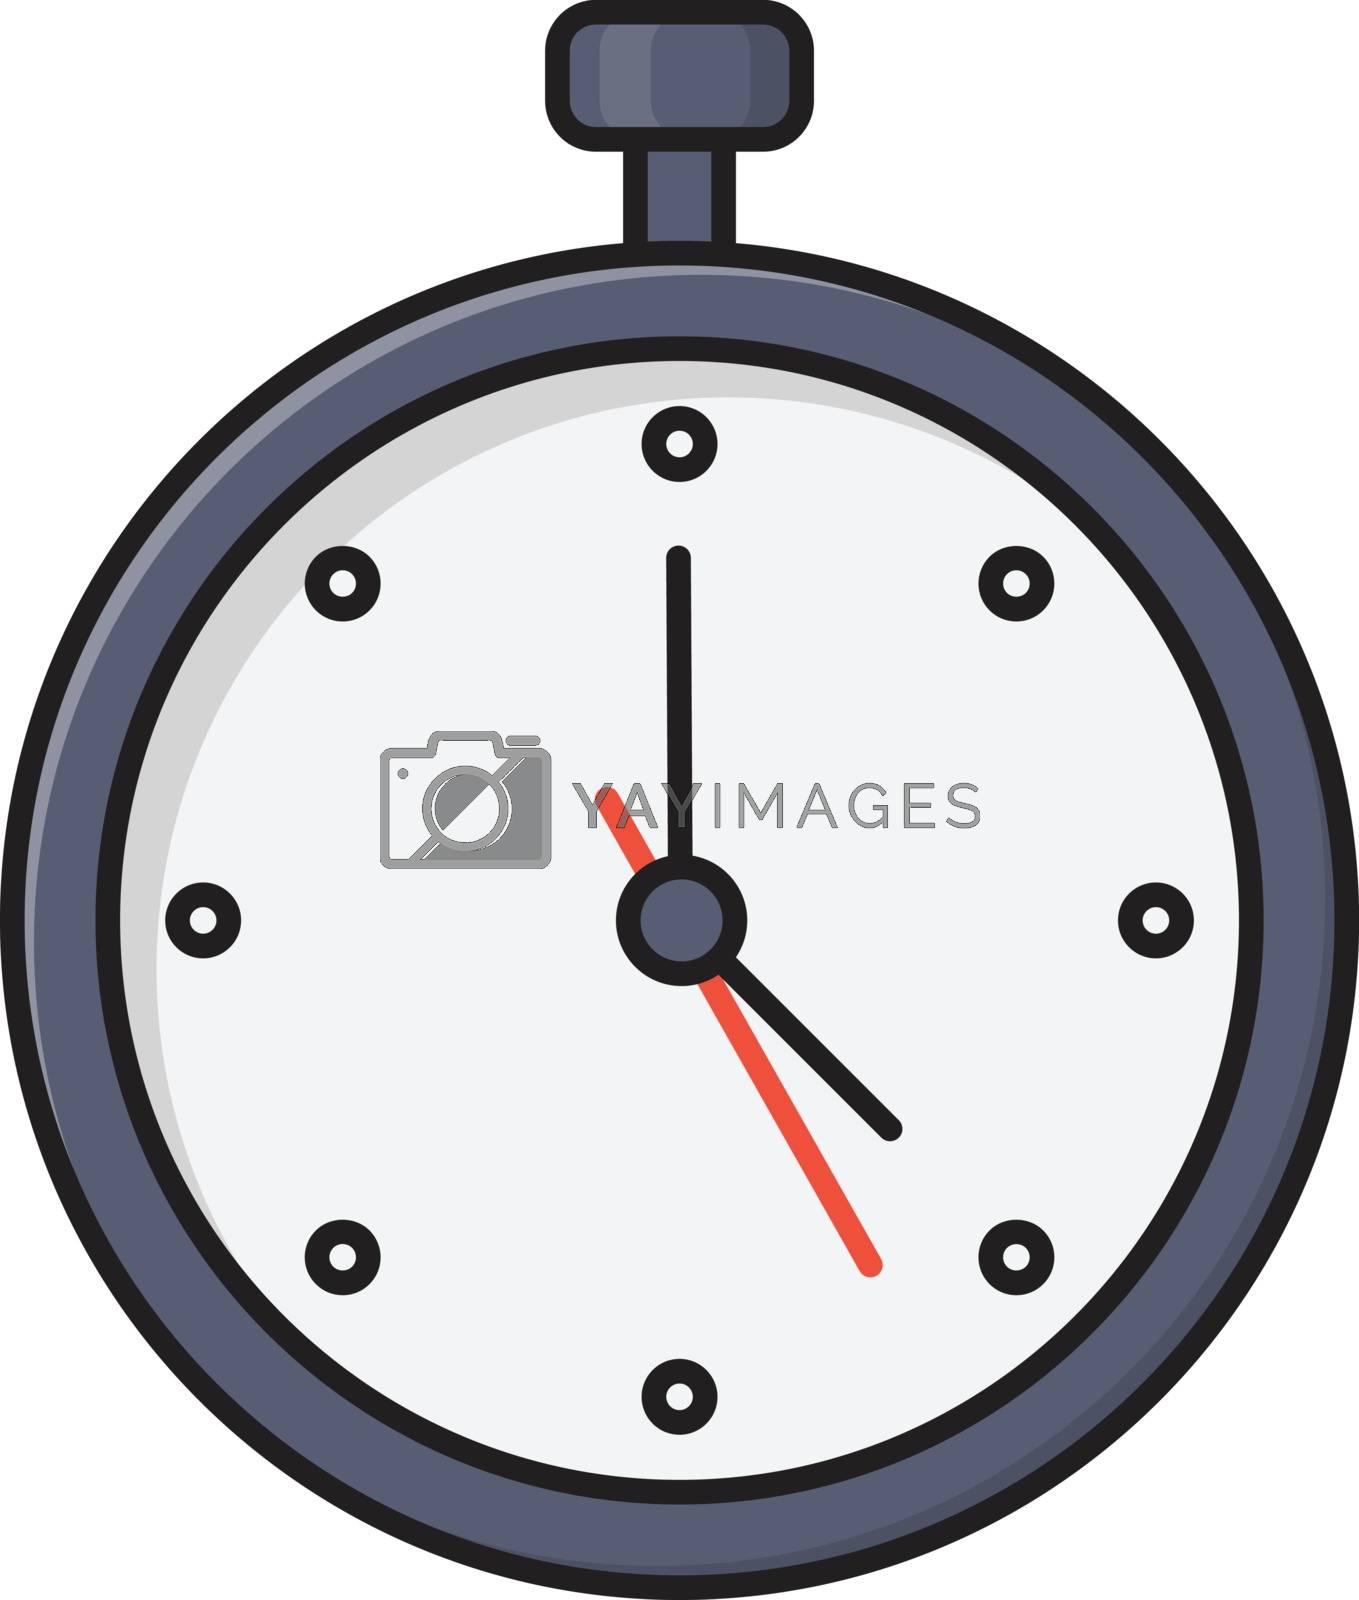 Royalty free image of alarm by vectorstall